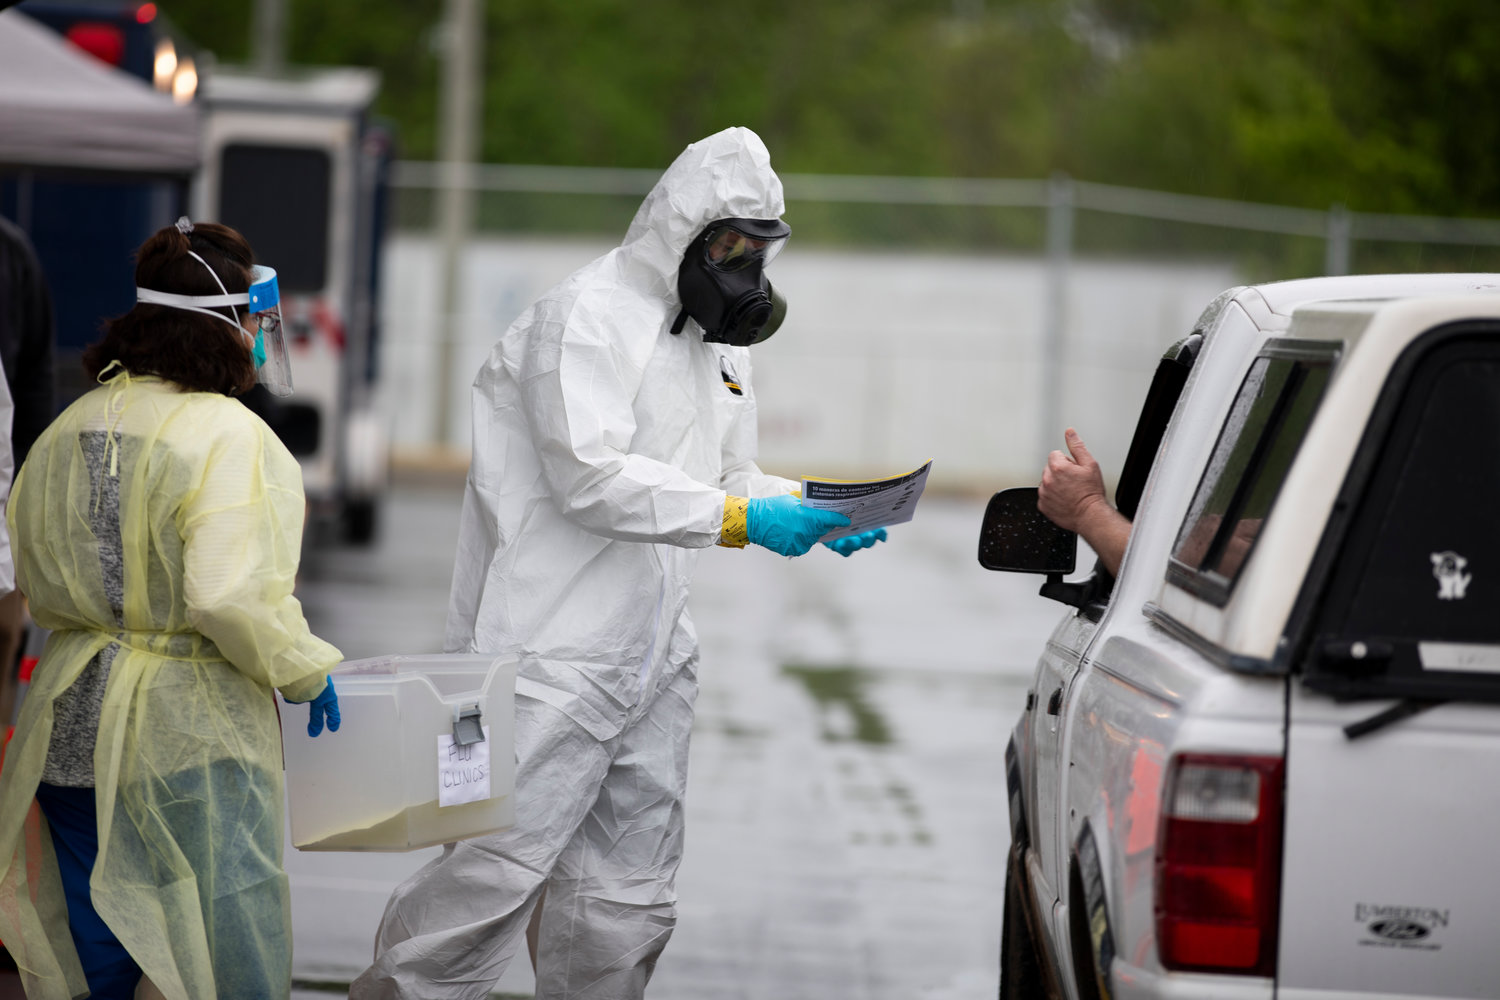 A North Carolina National Guard Soldier with the 42nd Civil Support Team works with local health and emergency officials to conduct drive-thru and walk-up COVID-19 testing for employees of the Mountaire Farms poultry processing plant in Siler City on April 23, 2020.